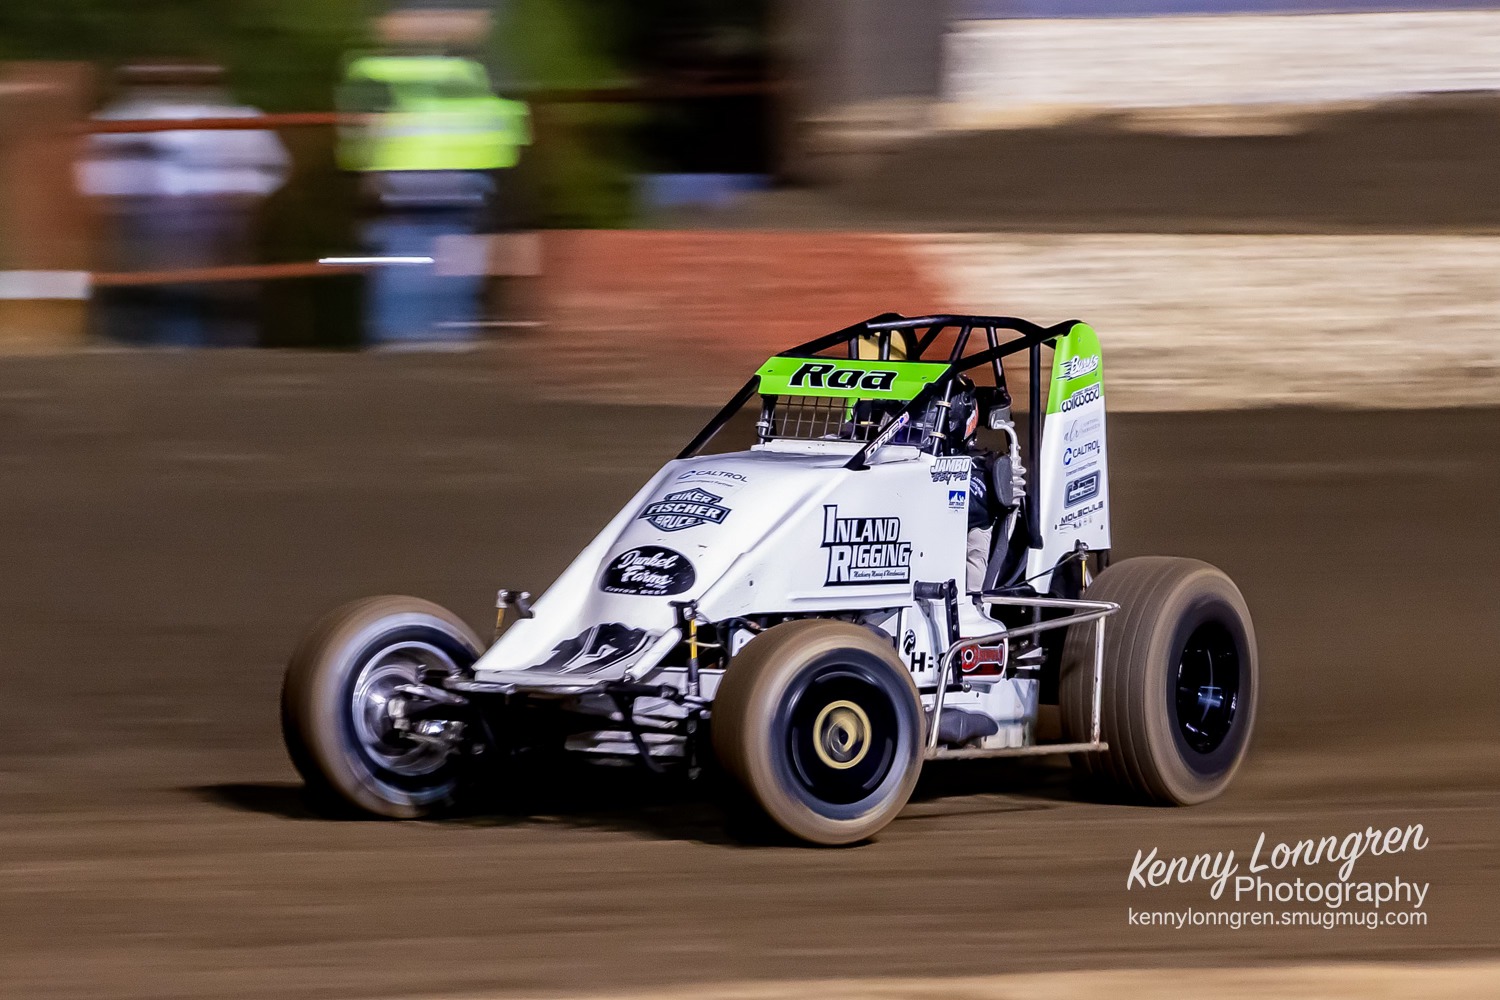 BRODY ROA AND TOMMY DUNKEL’S TURKEY NIGHT GRAND PRIX DID NOT GO AS PLANNED